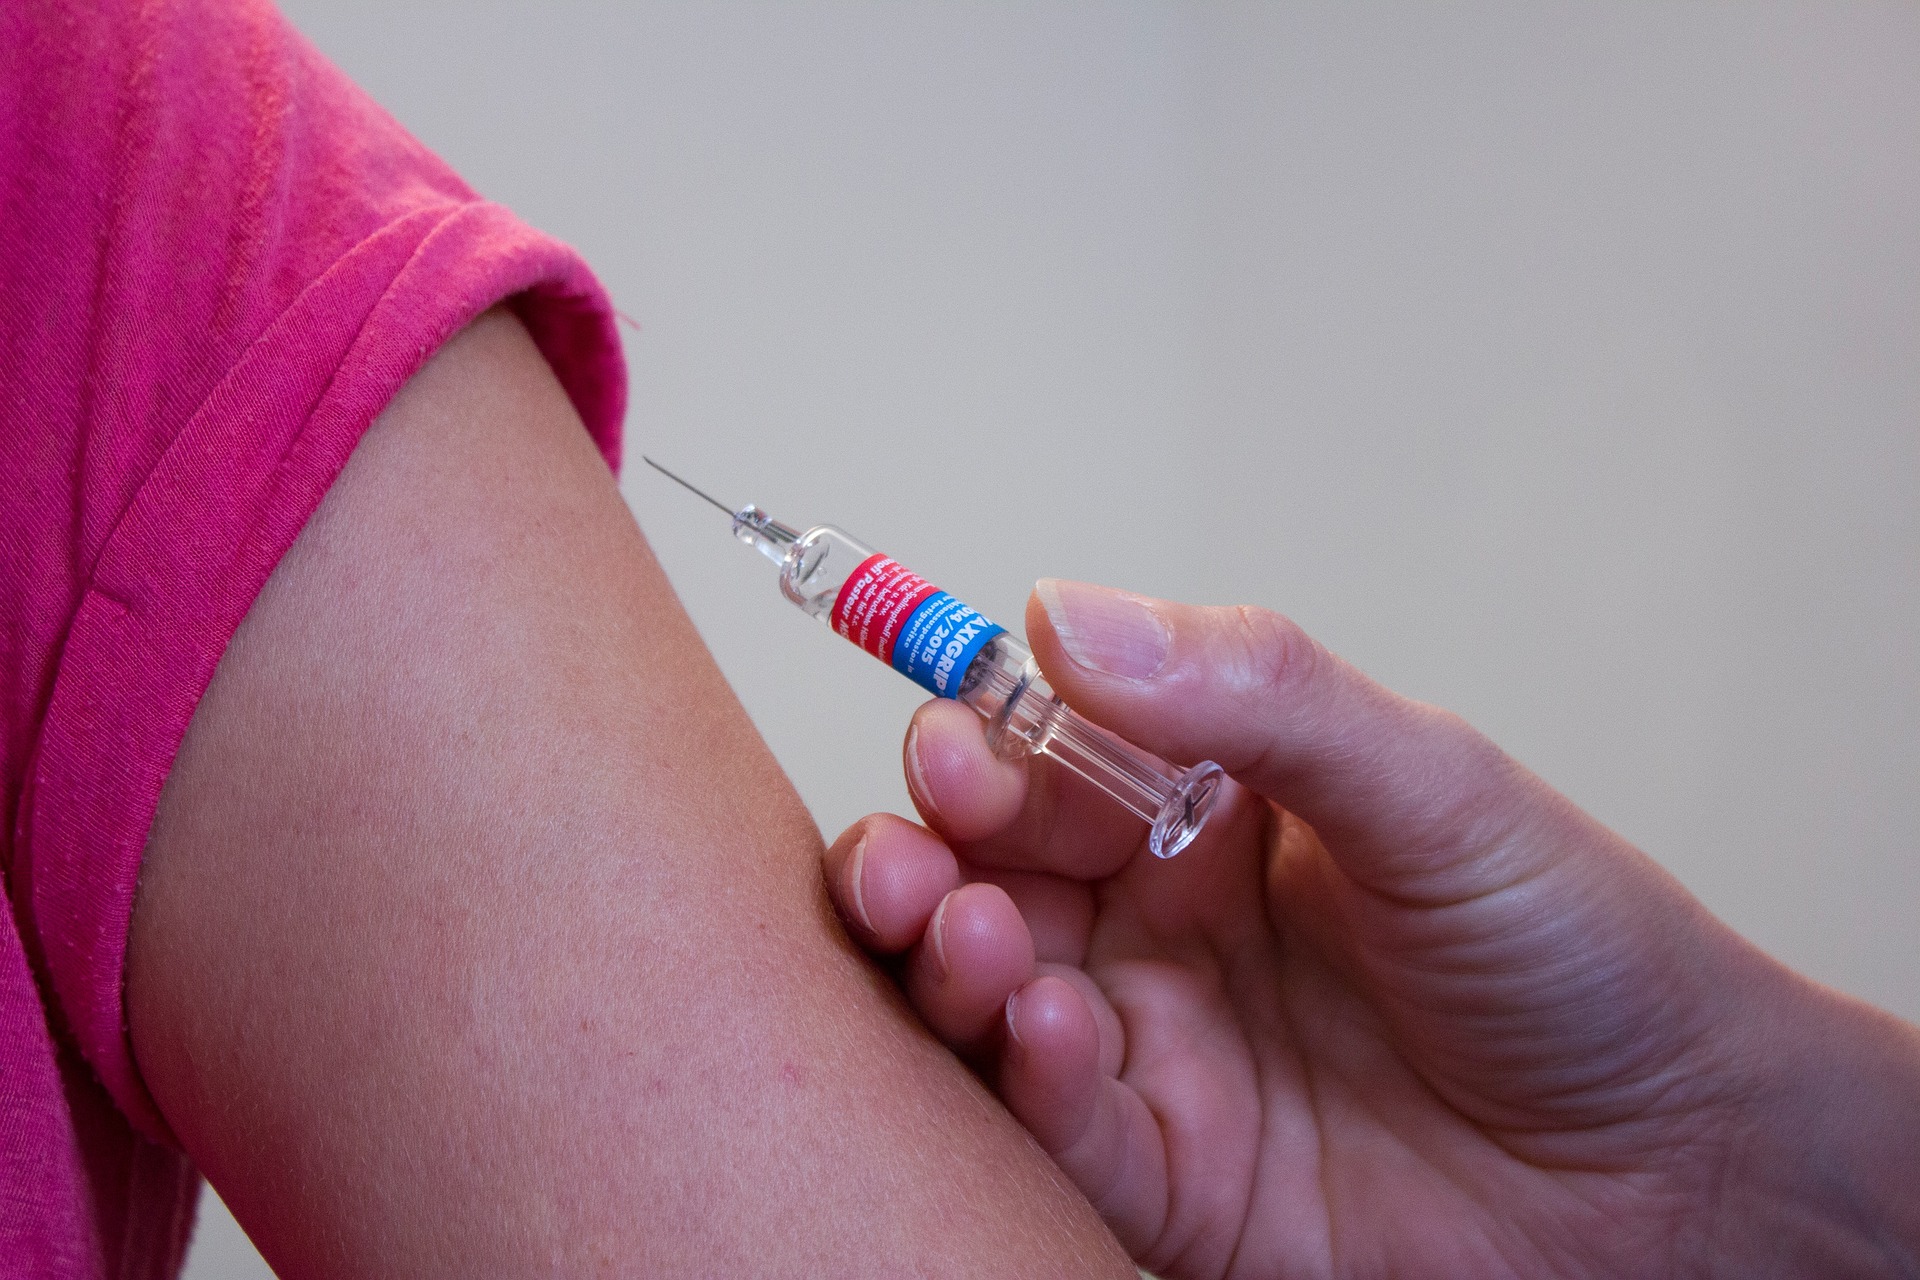 California Pushes for Fewer Exemptions to Mandatory Vaccinations